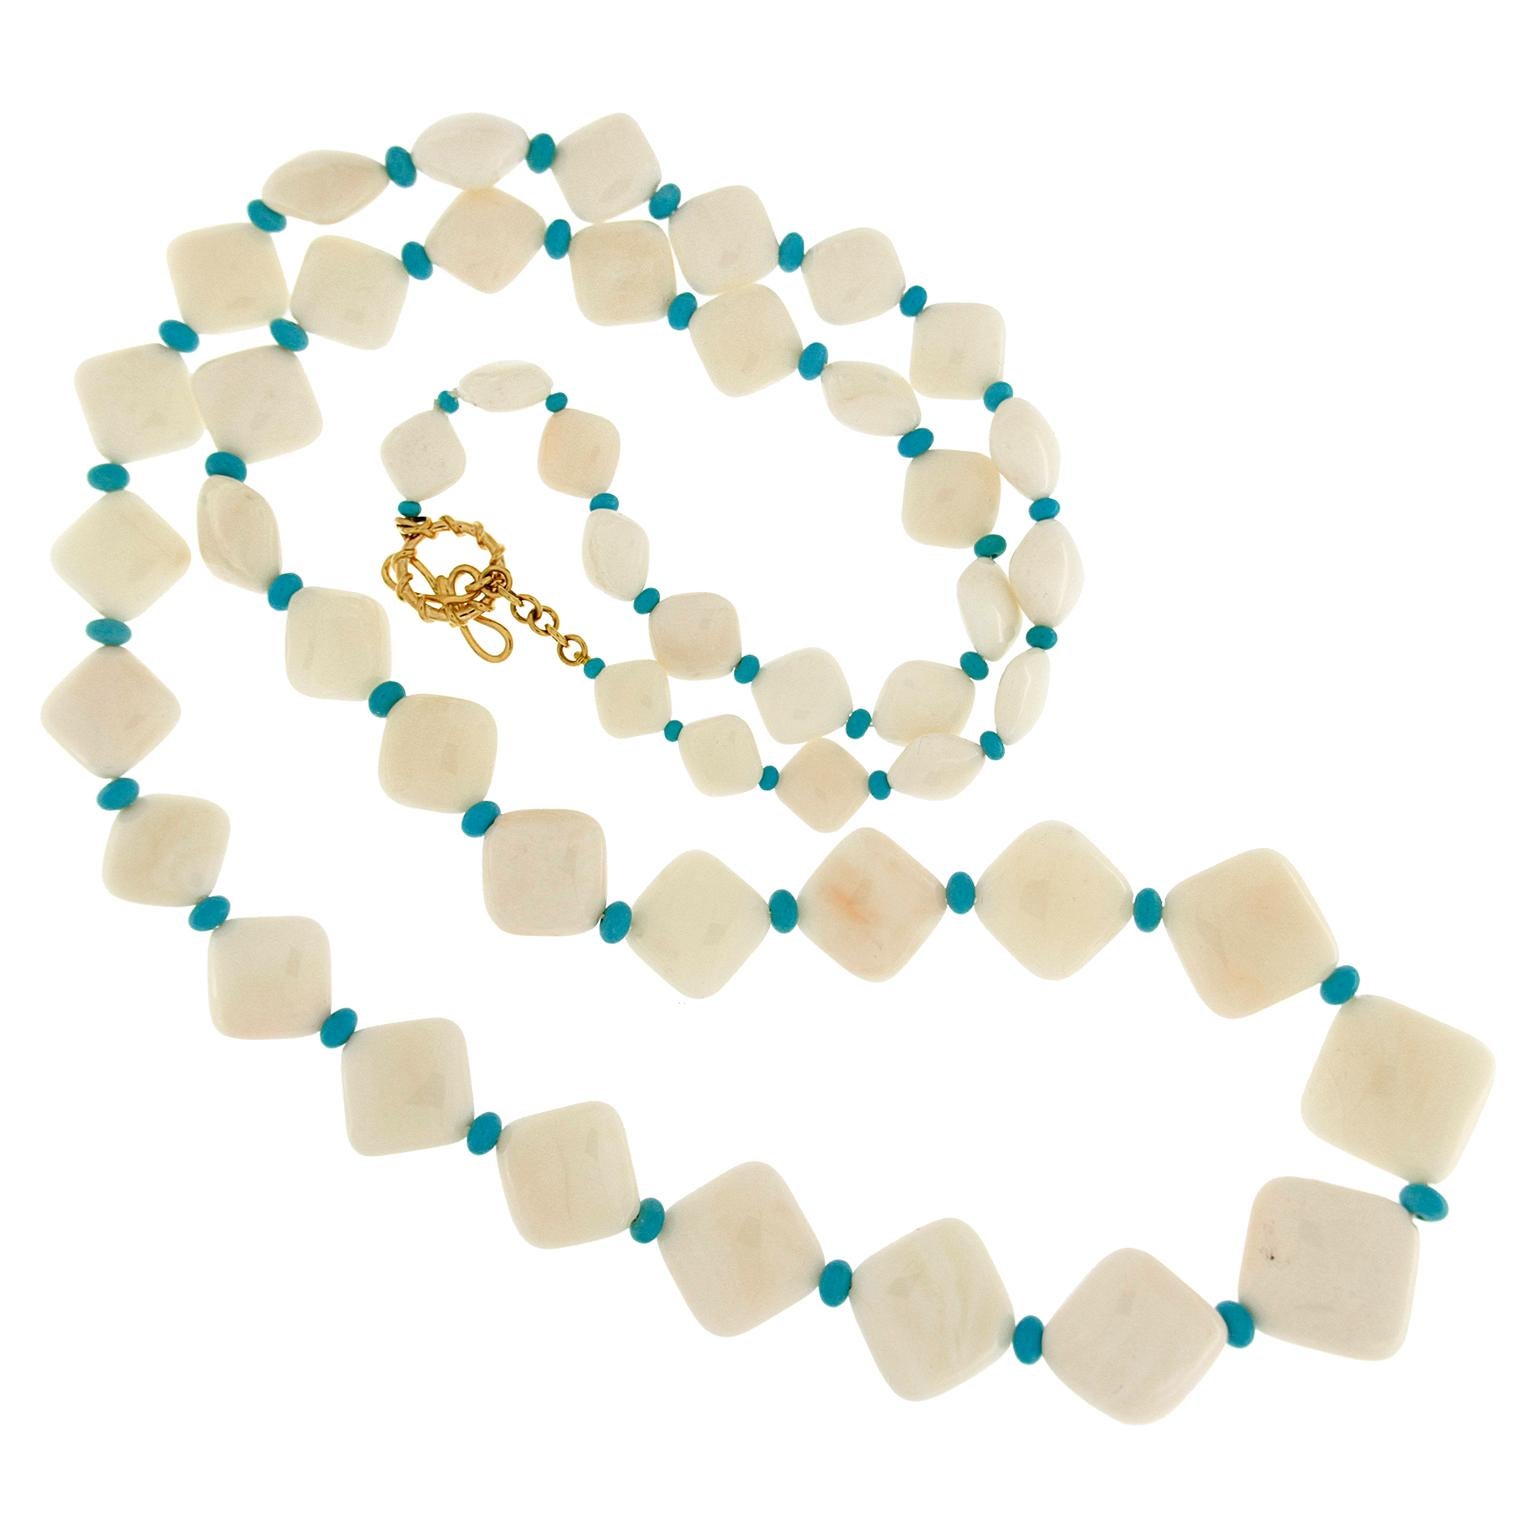 White Coral chicklets and turquoise necklace with medium ring and toggle in 18kt yellow gold.  